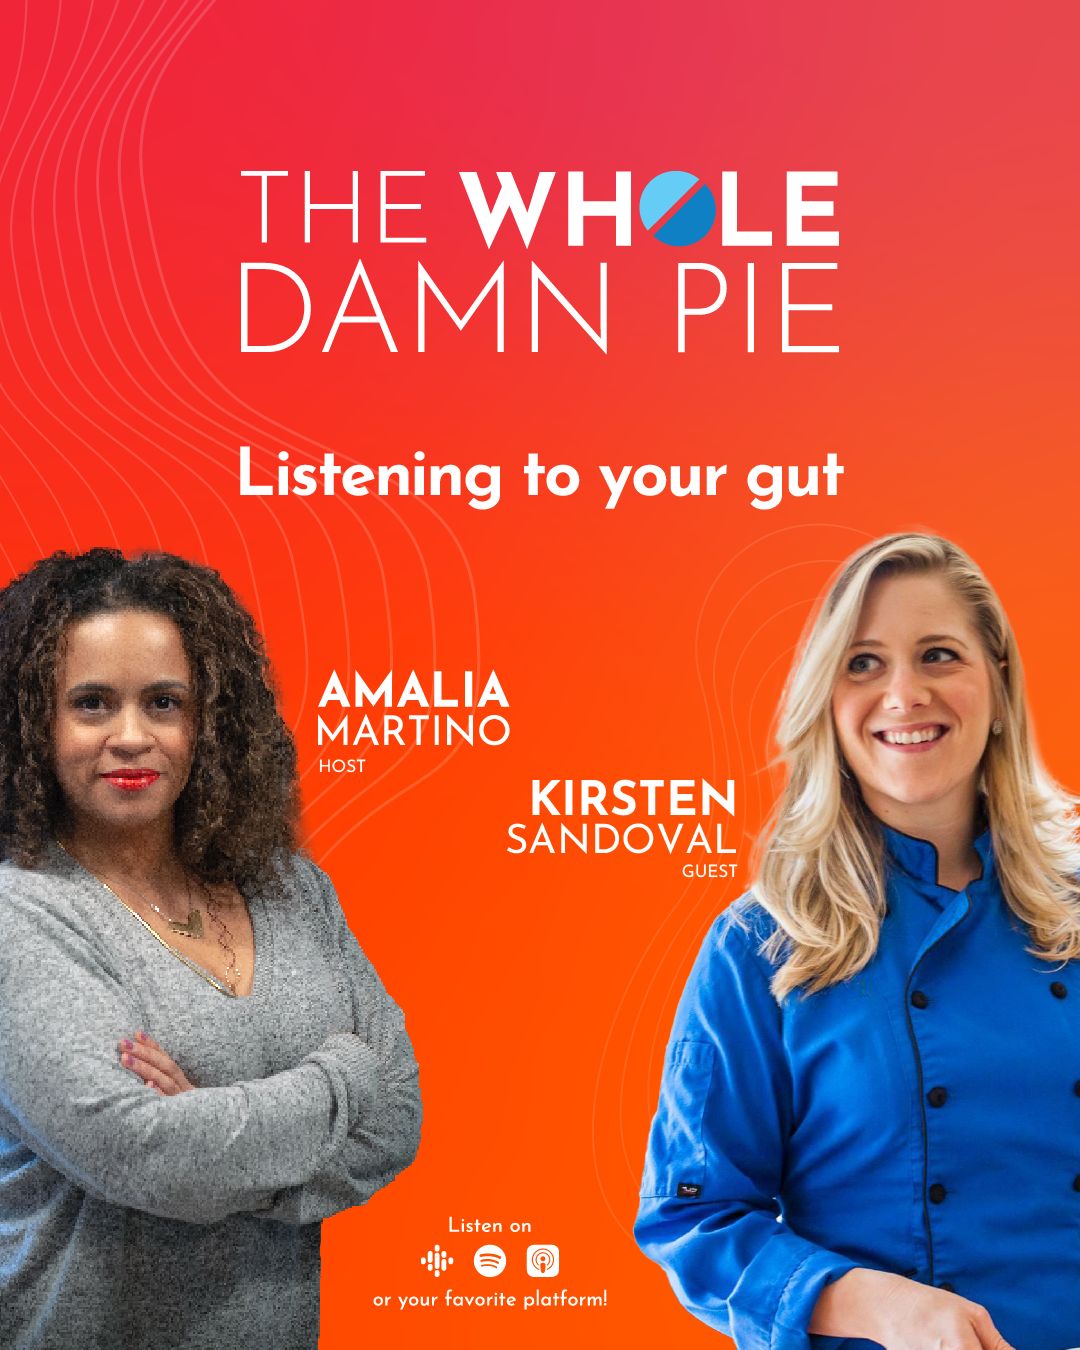 Chef Kirsten on The Whole Damn Pie podcast, hosted by Amalia Martino